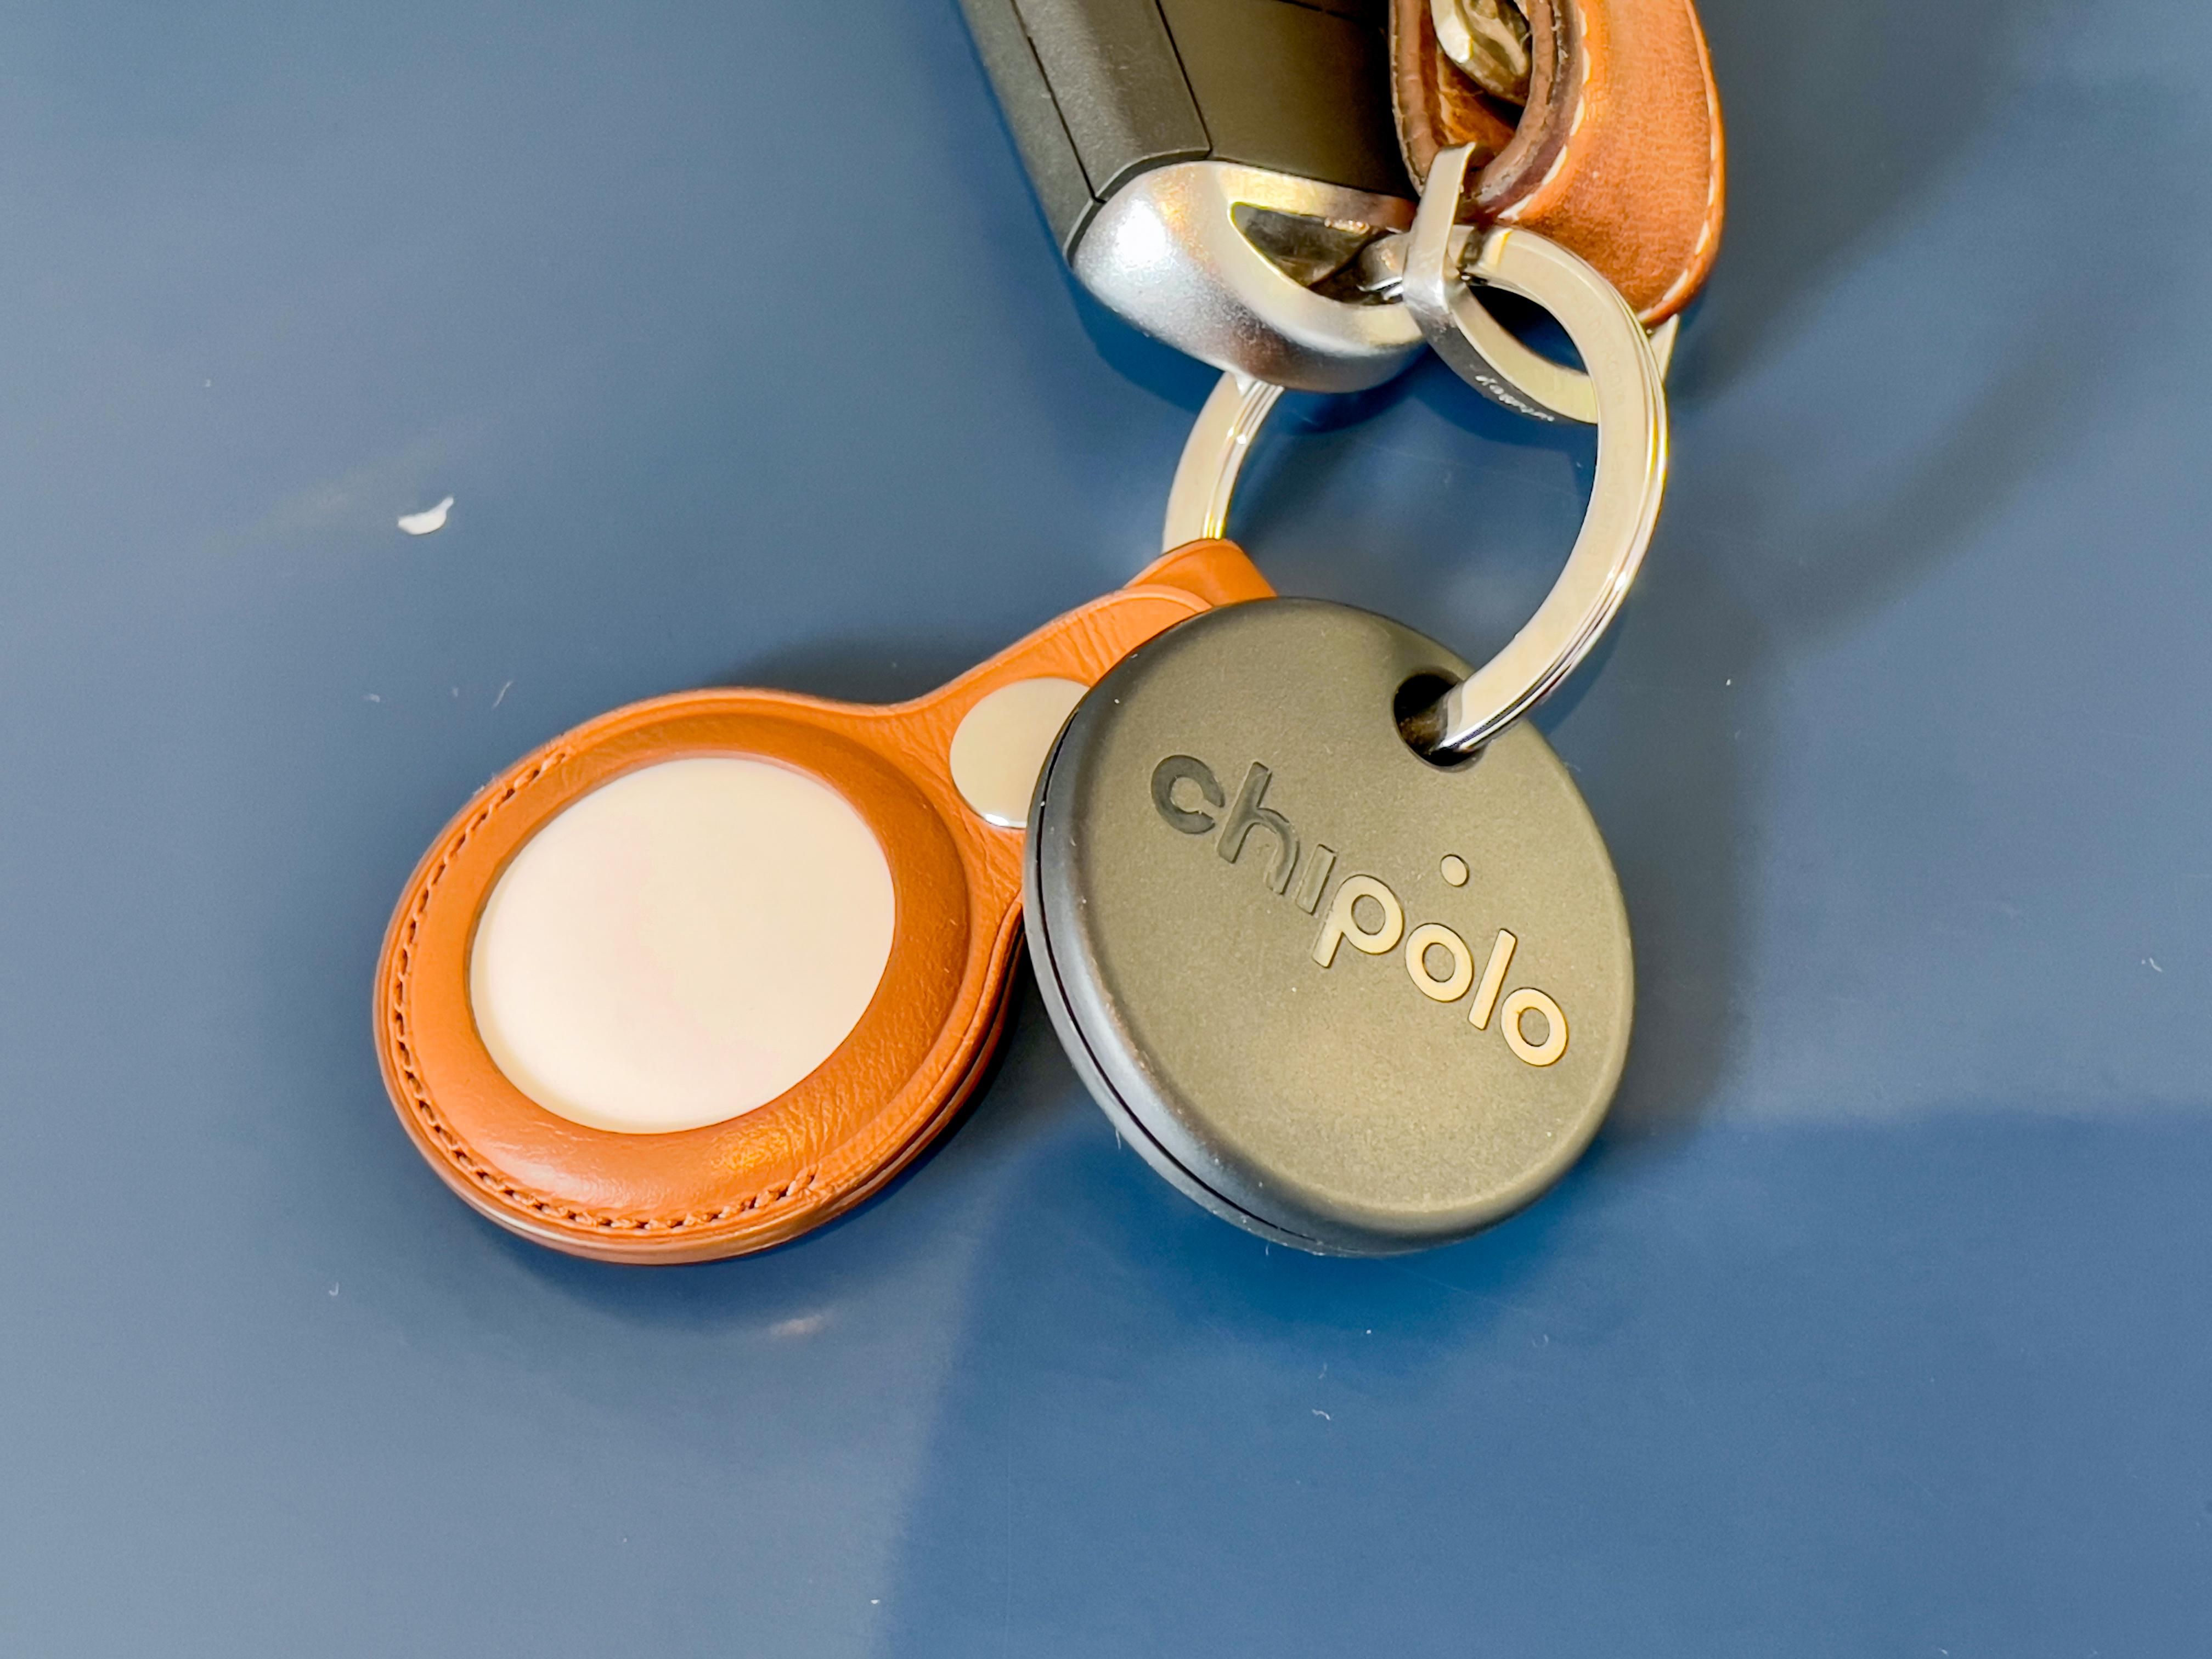 Chipolo Card Spot review: Card-sized tracker works with Apple's